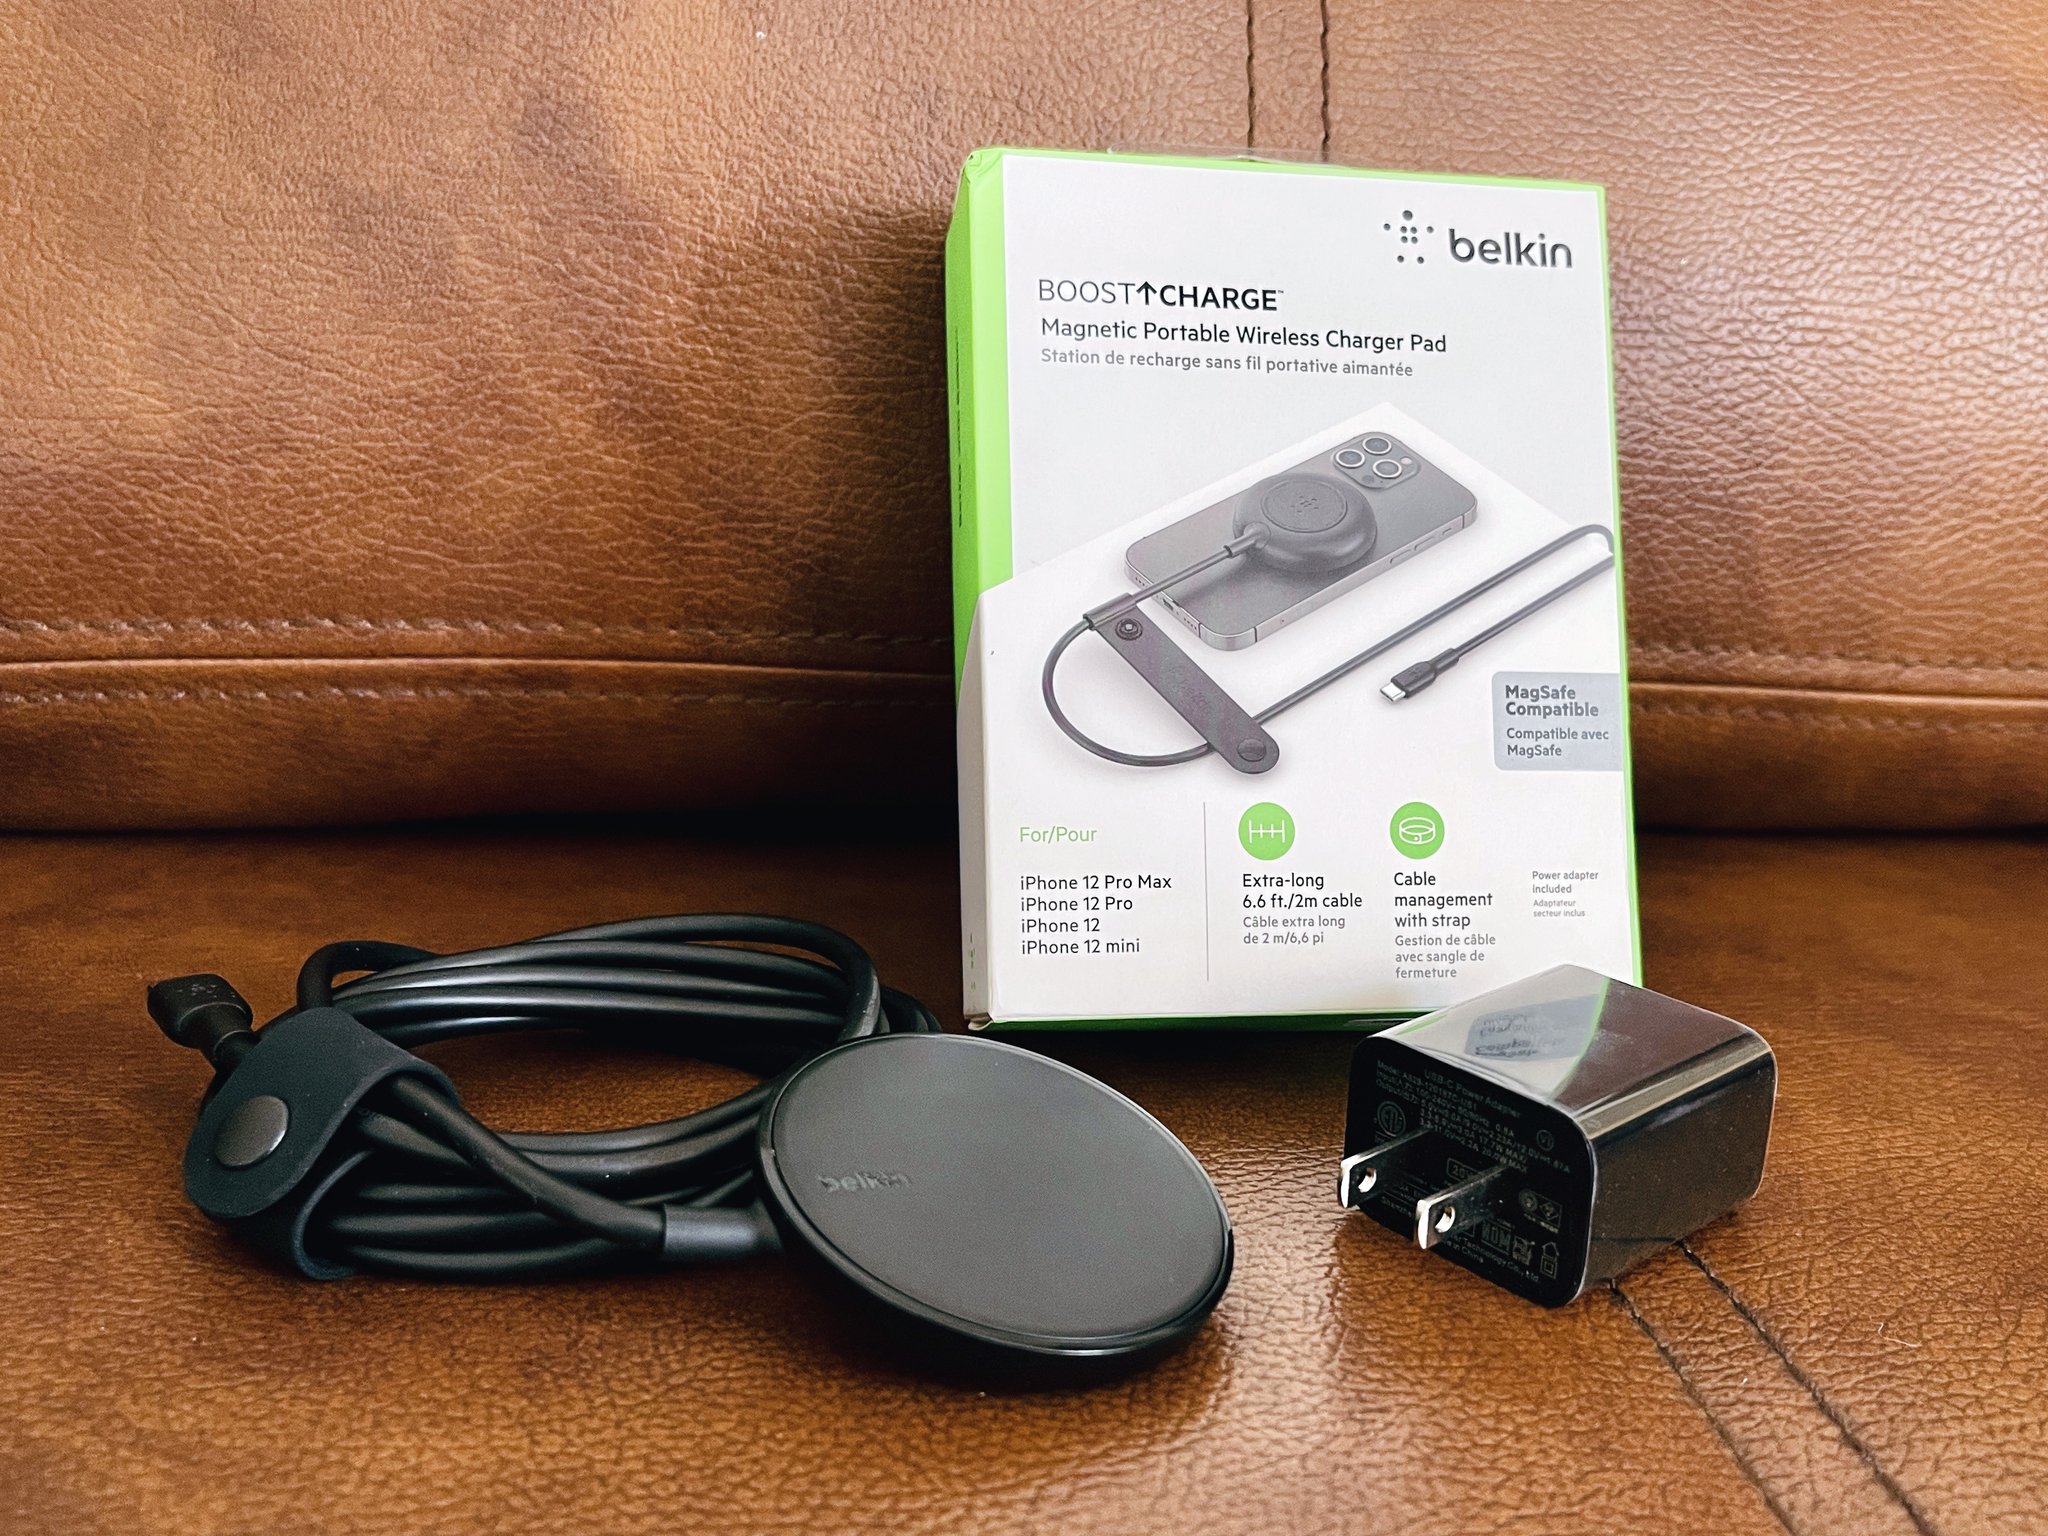 Belkin Boostcharge Magnetic Portable Wireless Charger Pad review: The go-to wireless  charger for travel